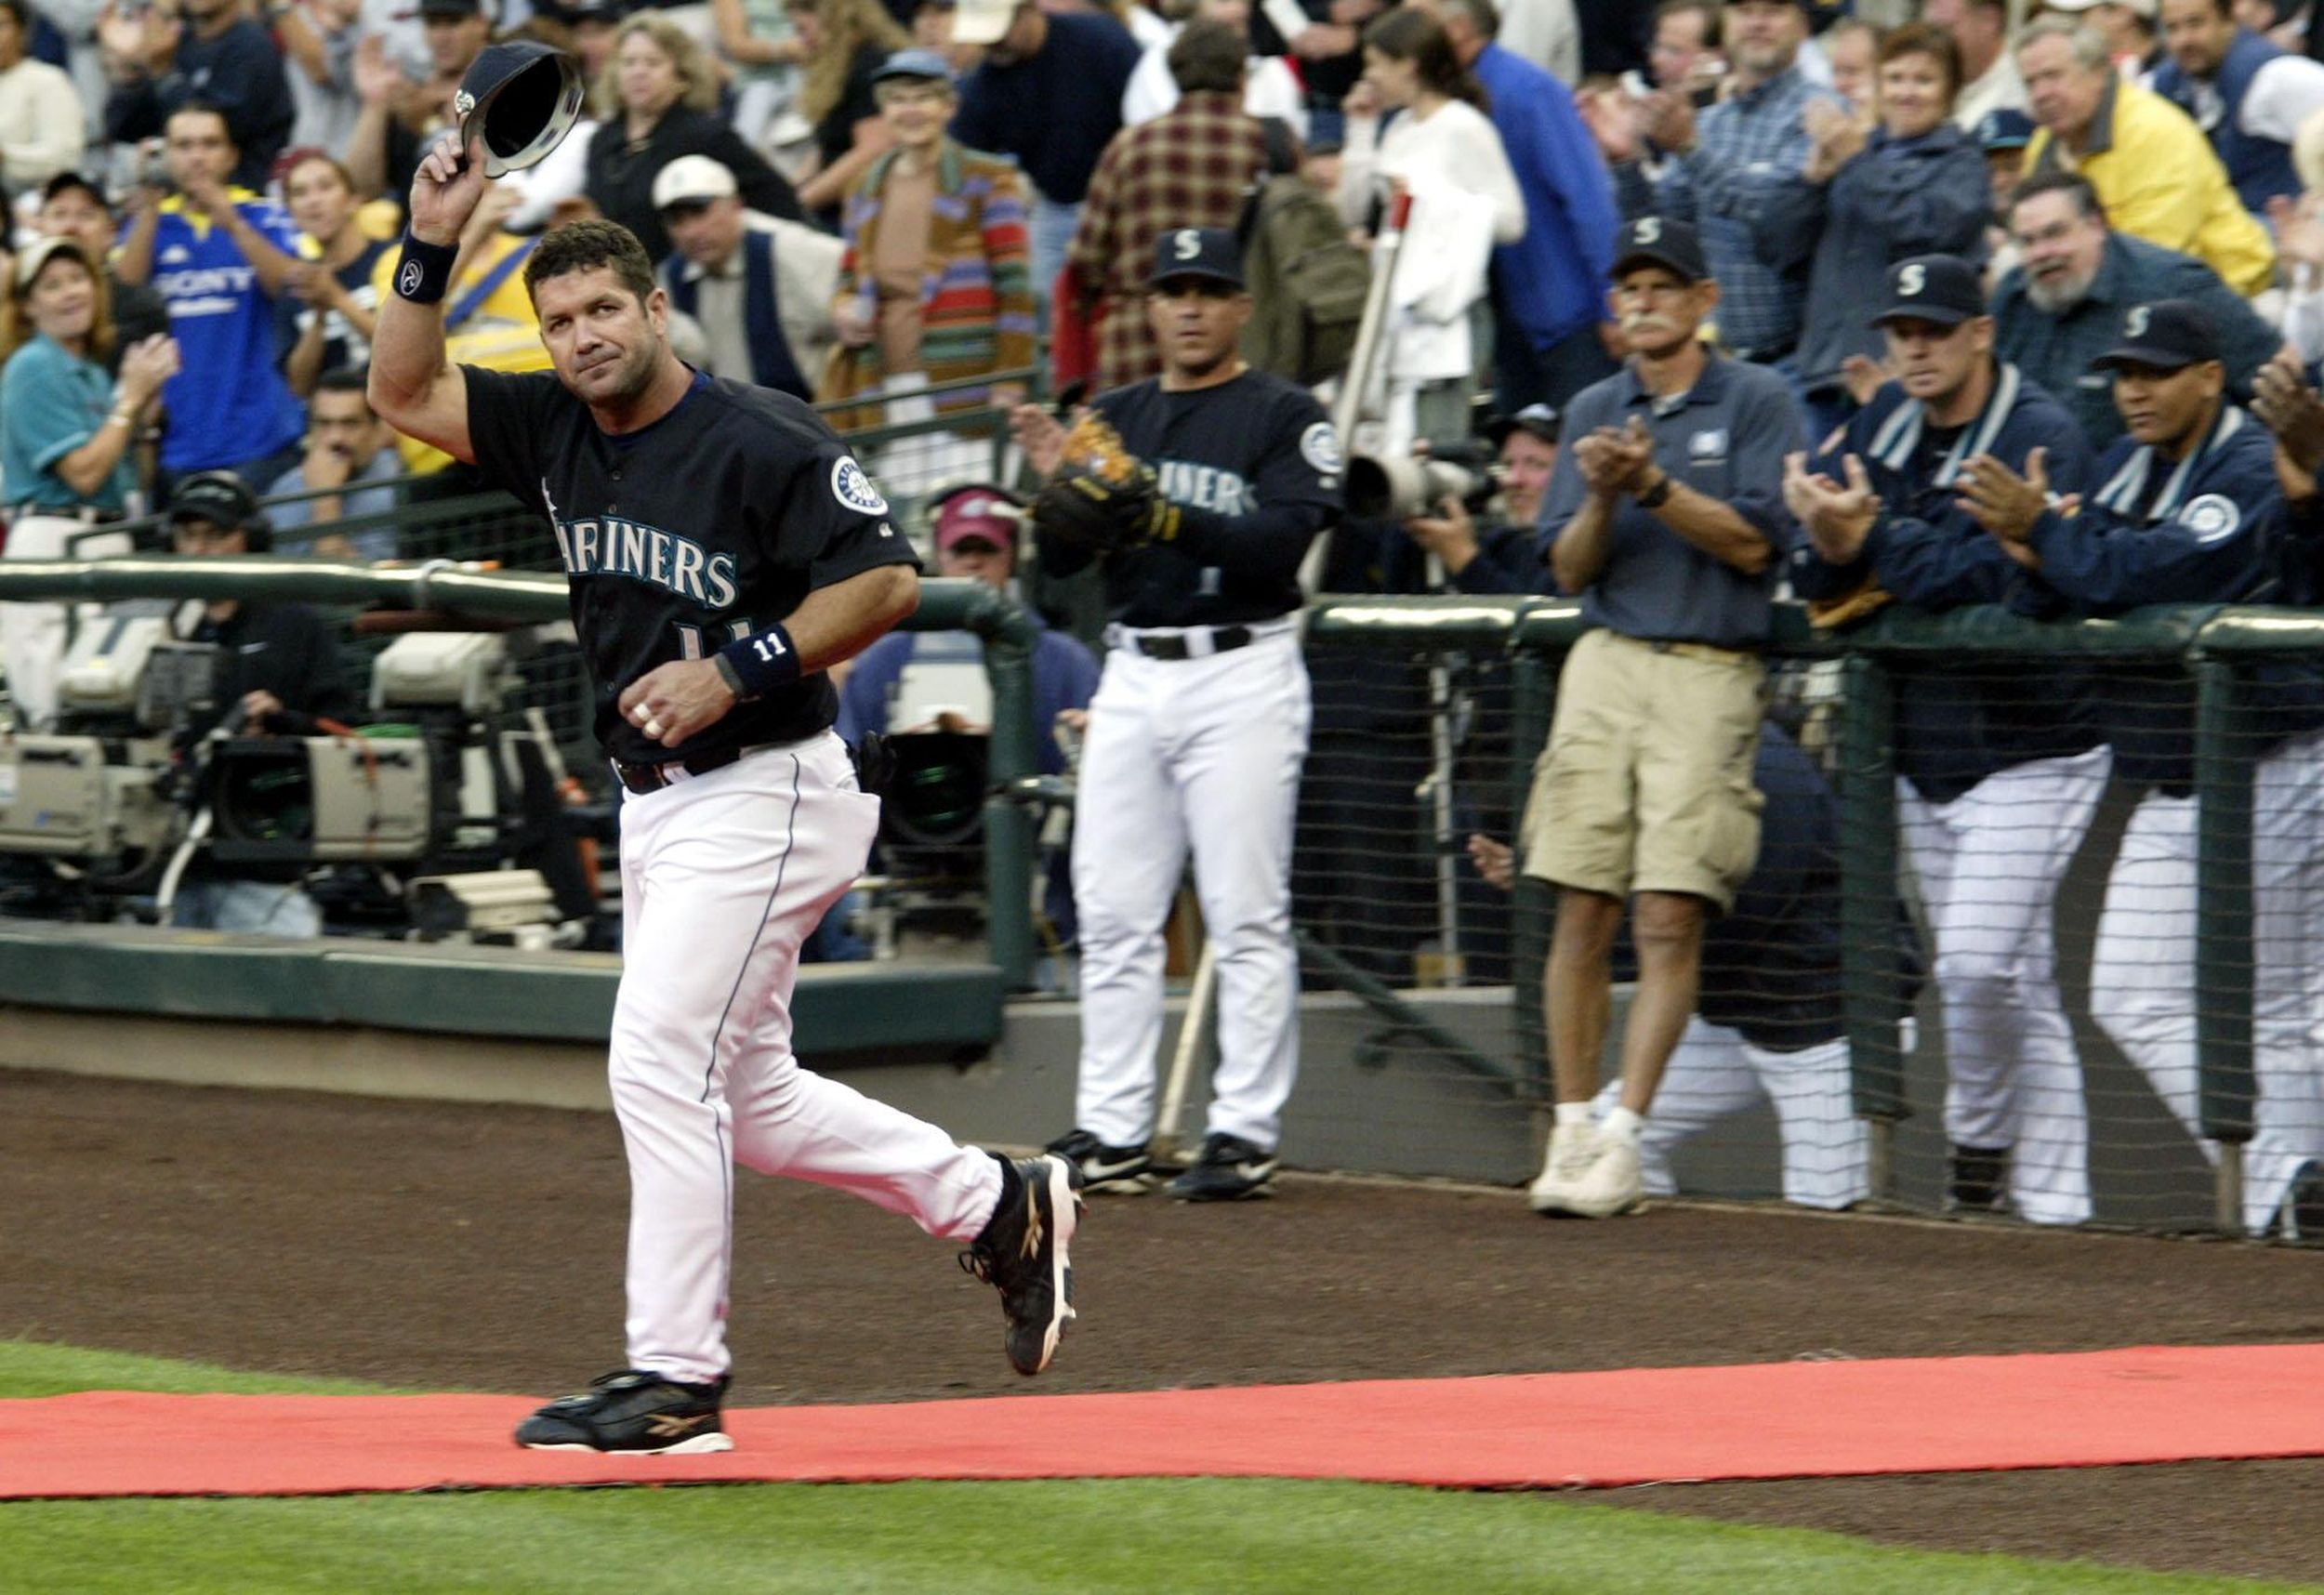 Ahead in the count: M's Edgar Martinez inching closer to Hall